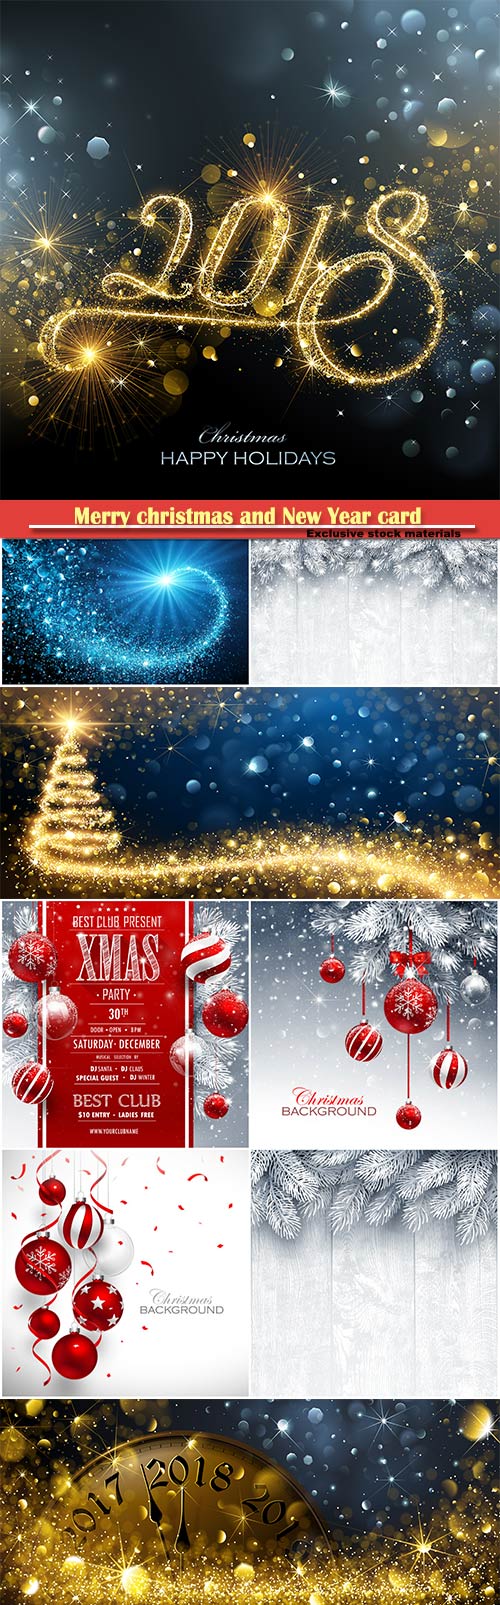 Merry christmas and New Year card with red balls and fir branches, snowy sparkling background